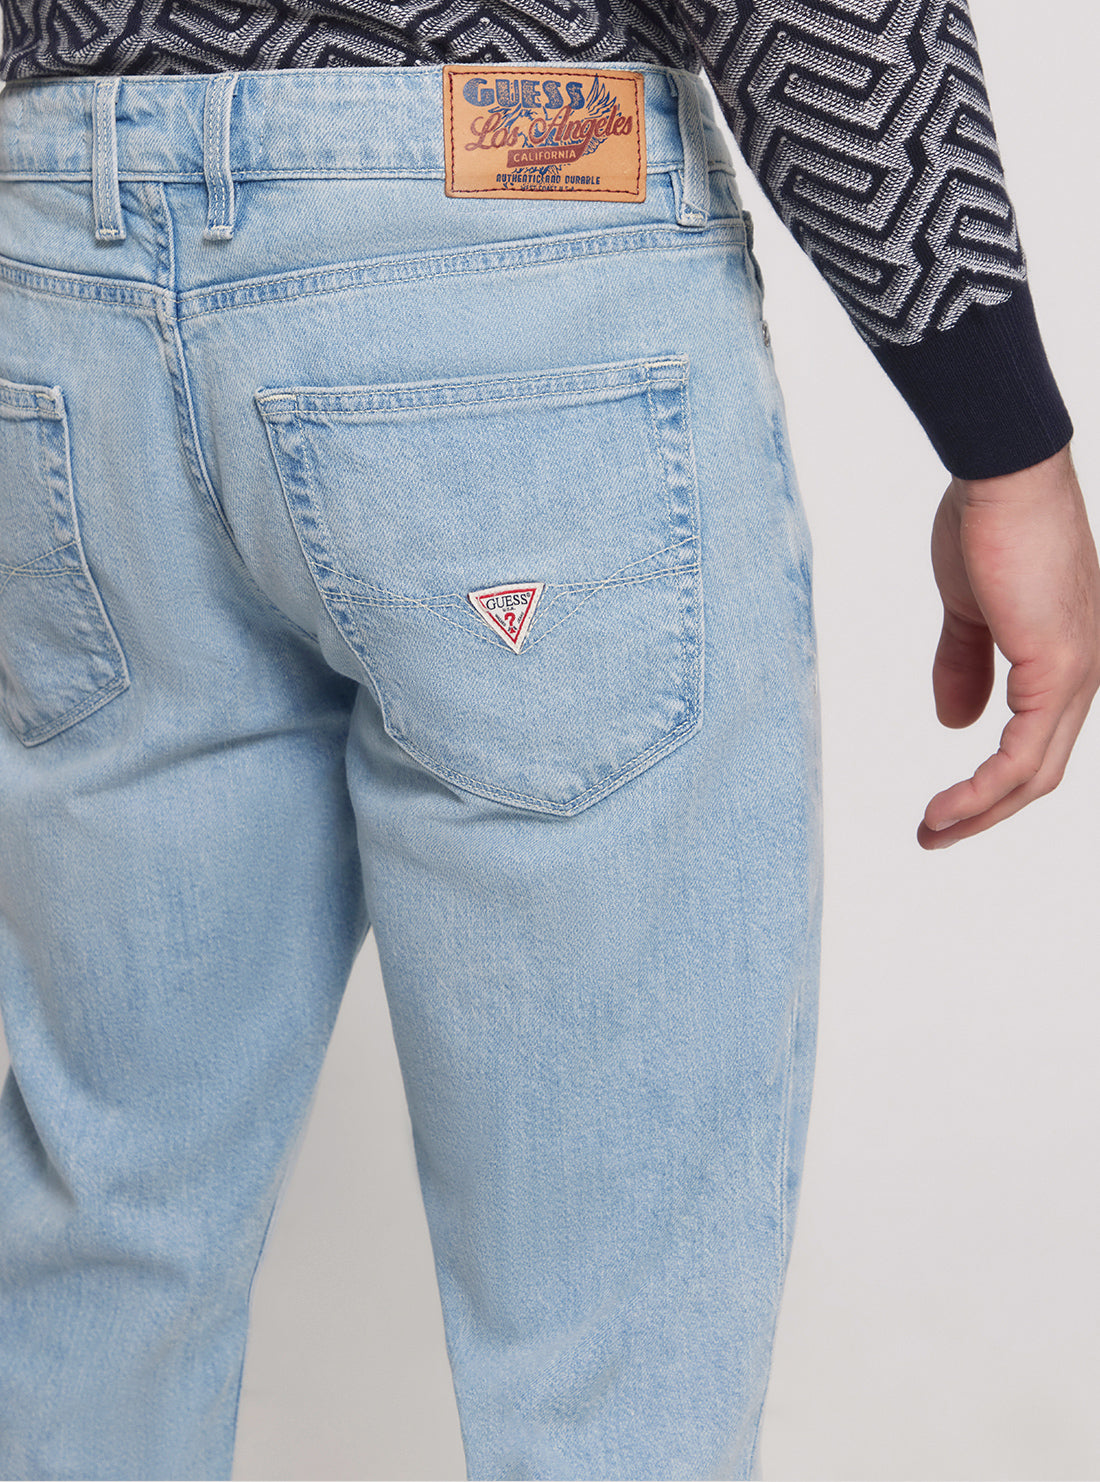 GUESS Low-Rise Angels Denim Jeans in Light Wash detail view